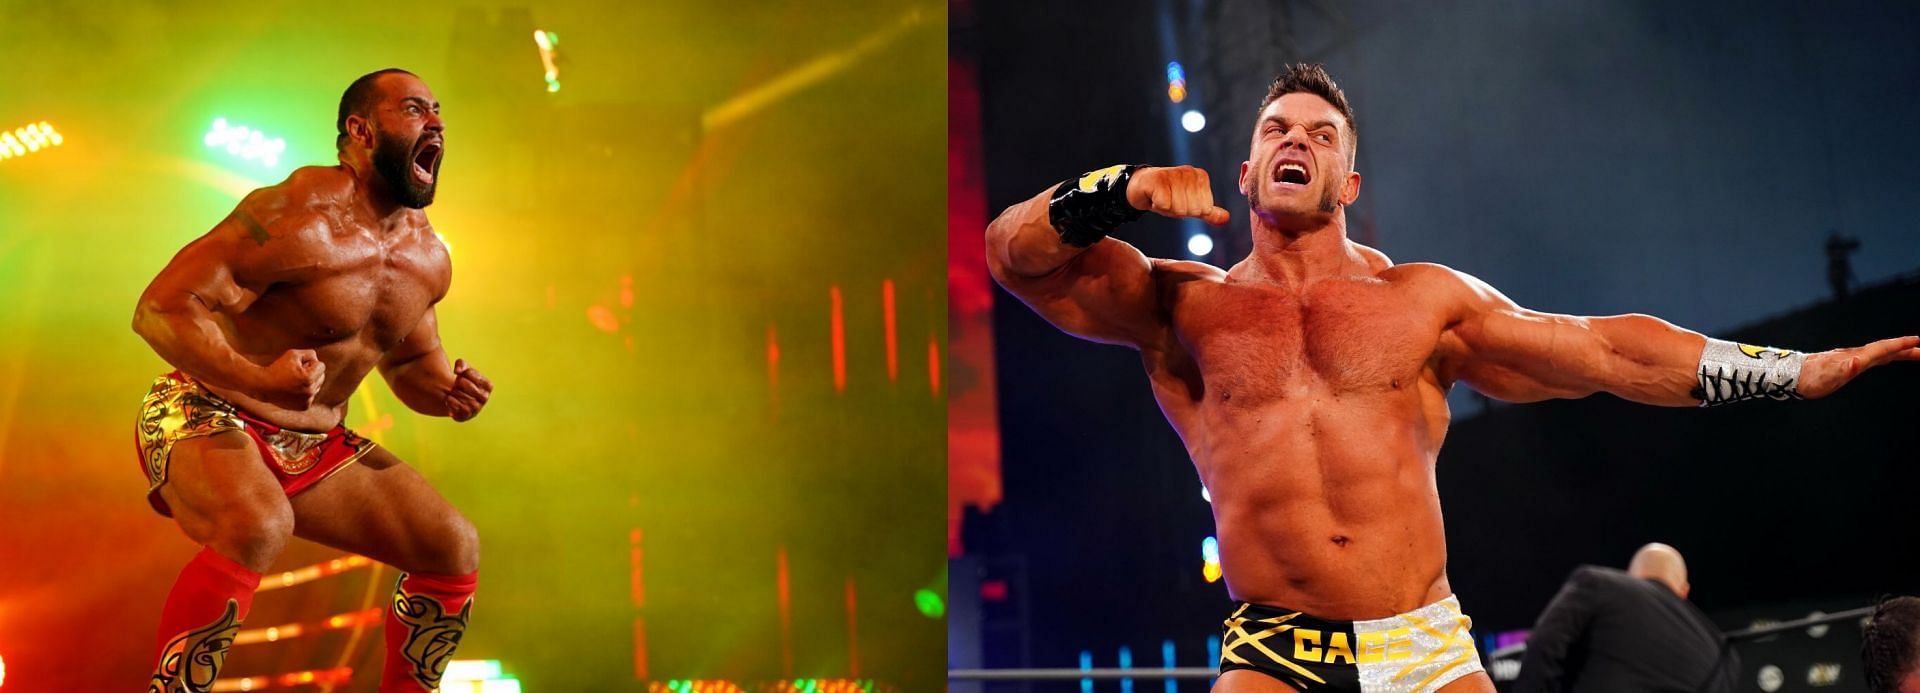 AEW has one of the best rosters currently, but could these 5 wrestlers get lost in the shuffle during 2022?